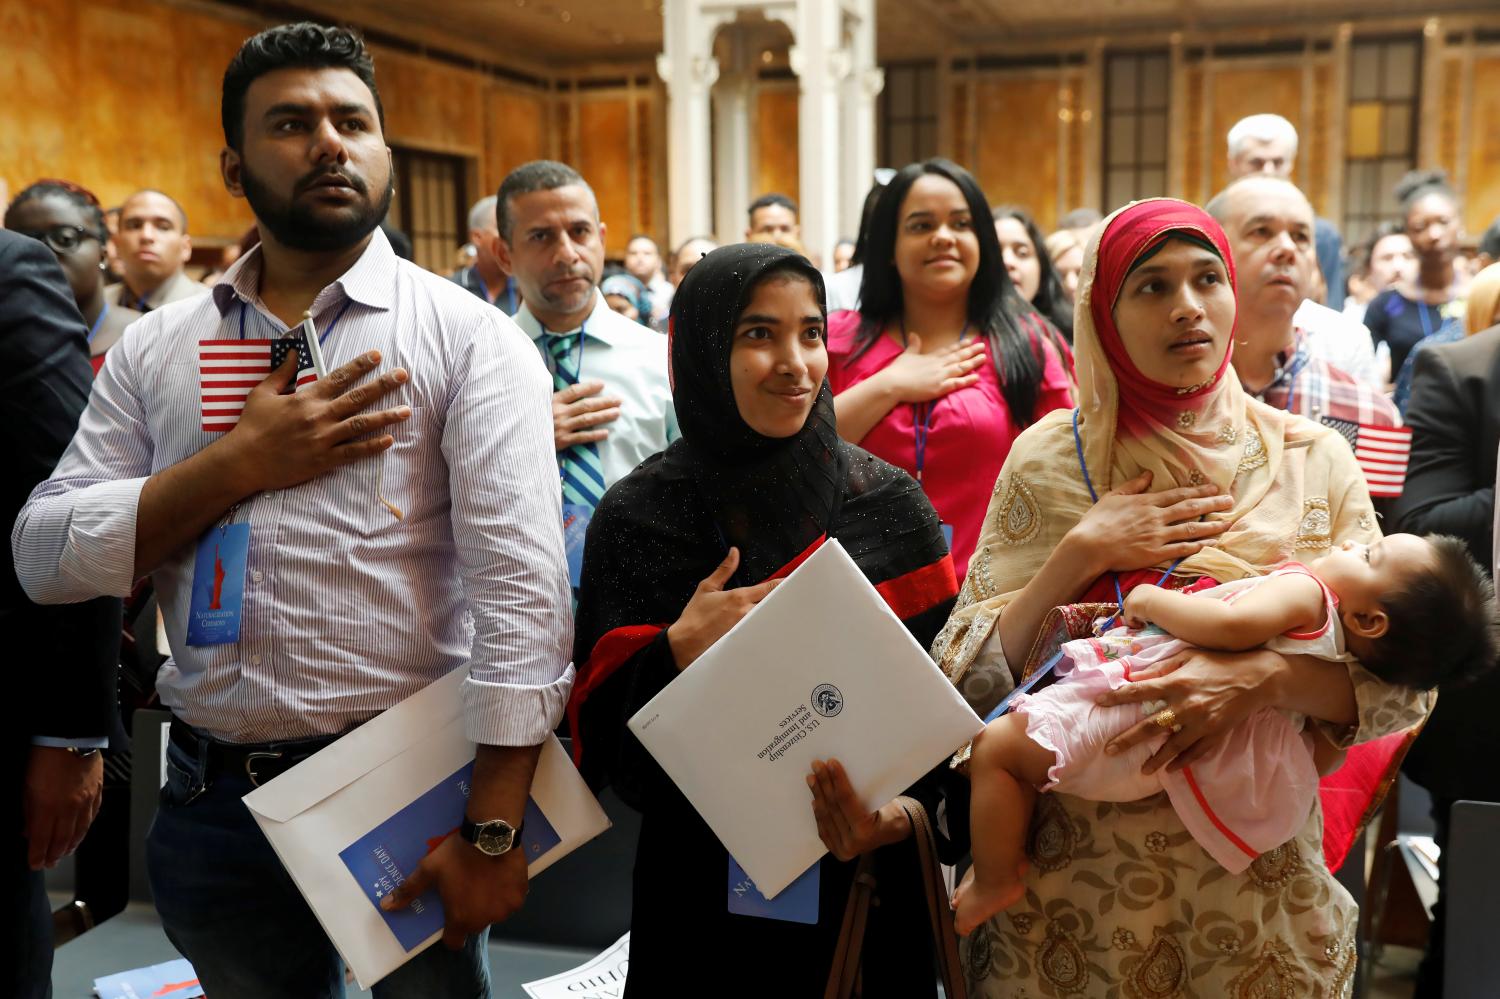 New citizens stand during the National Anthem at a U.S. Citizenship and Immigration Services (USCIS) naturalization ceremony at the New York Public Library in Manhattan, New York, U.S., July 3, 2018.  REUTERS/Shannon Stapleton - RC1DCBADC590